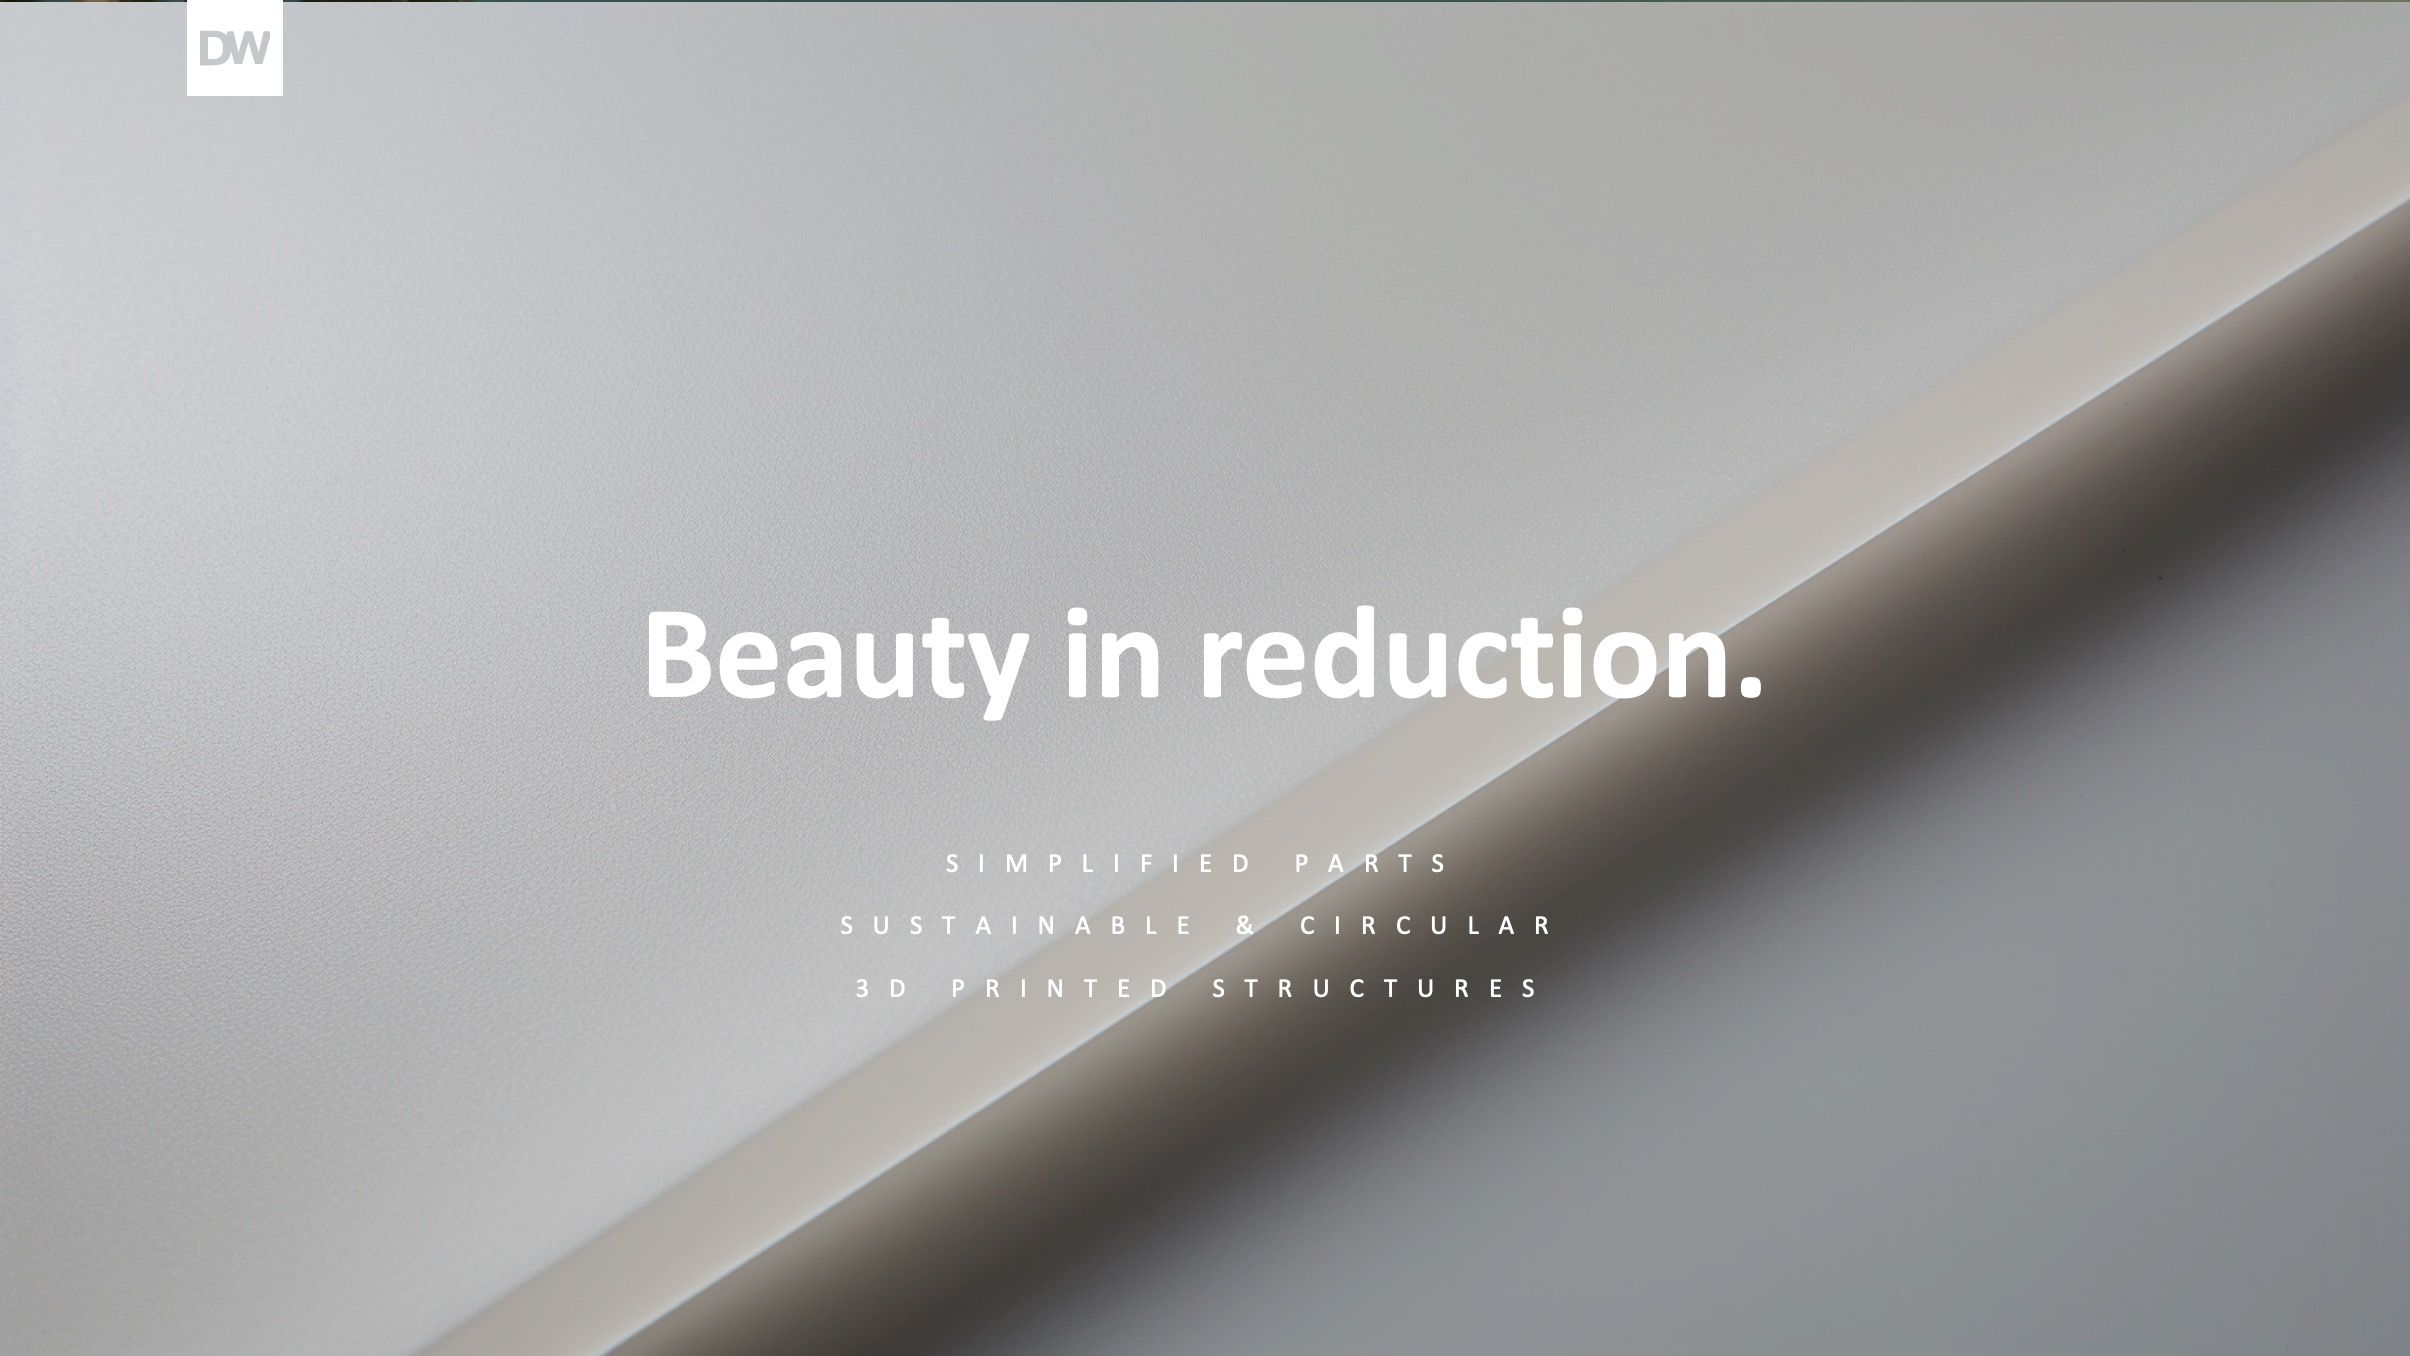 Beauty in reduction.